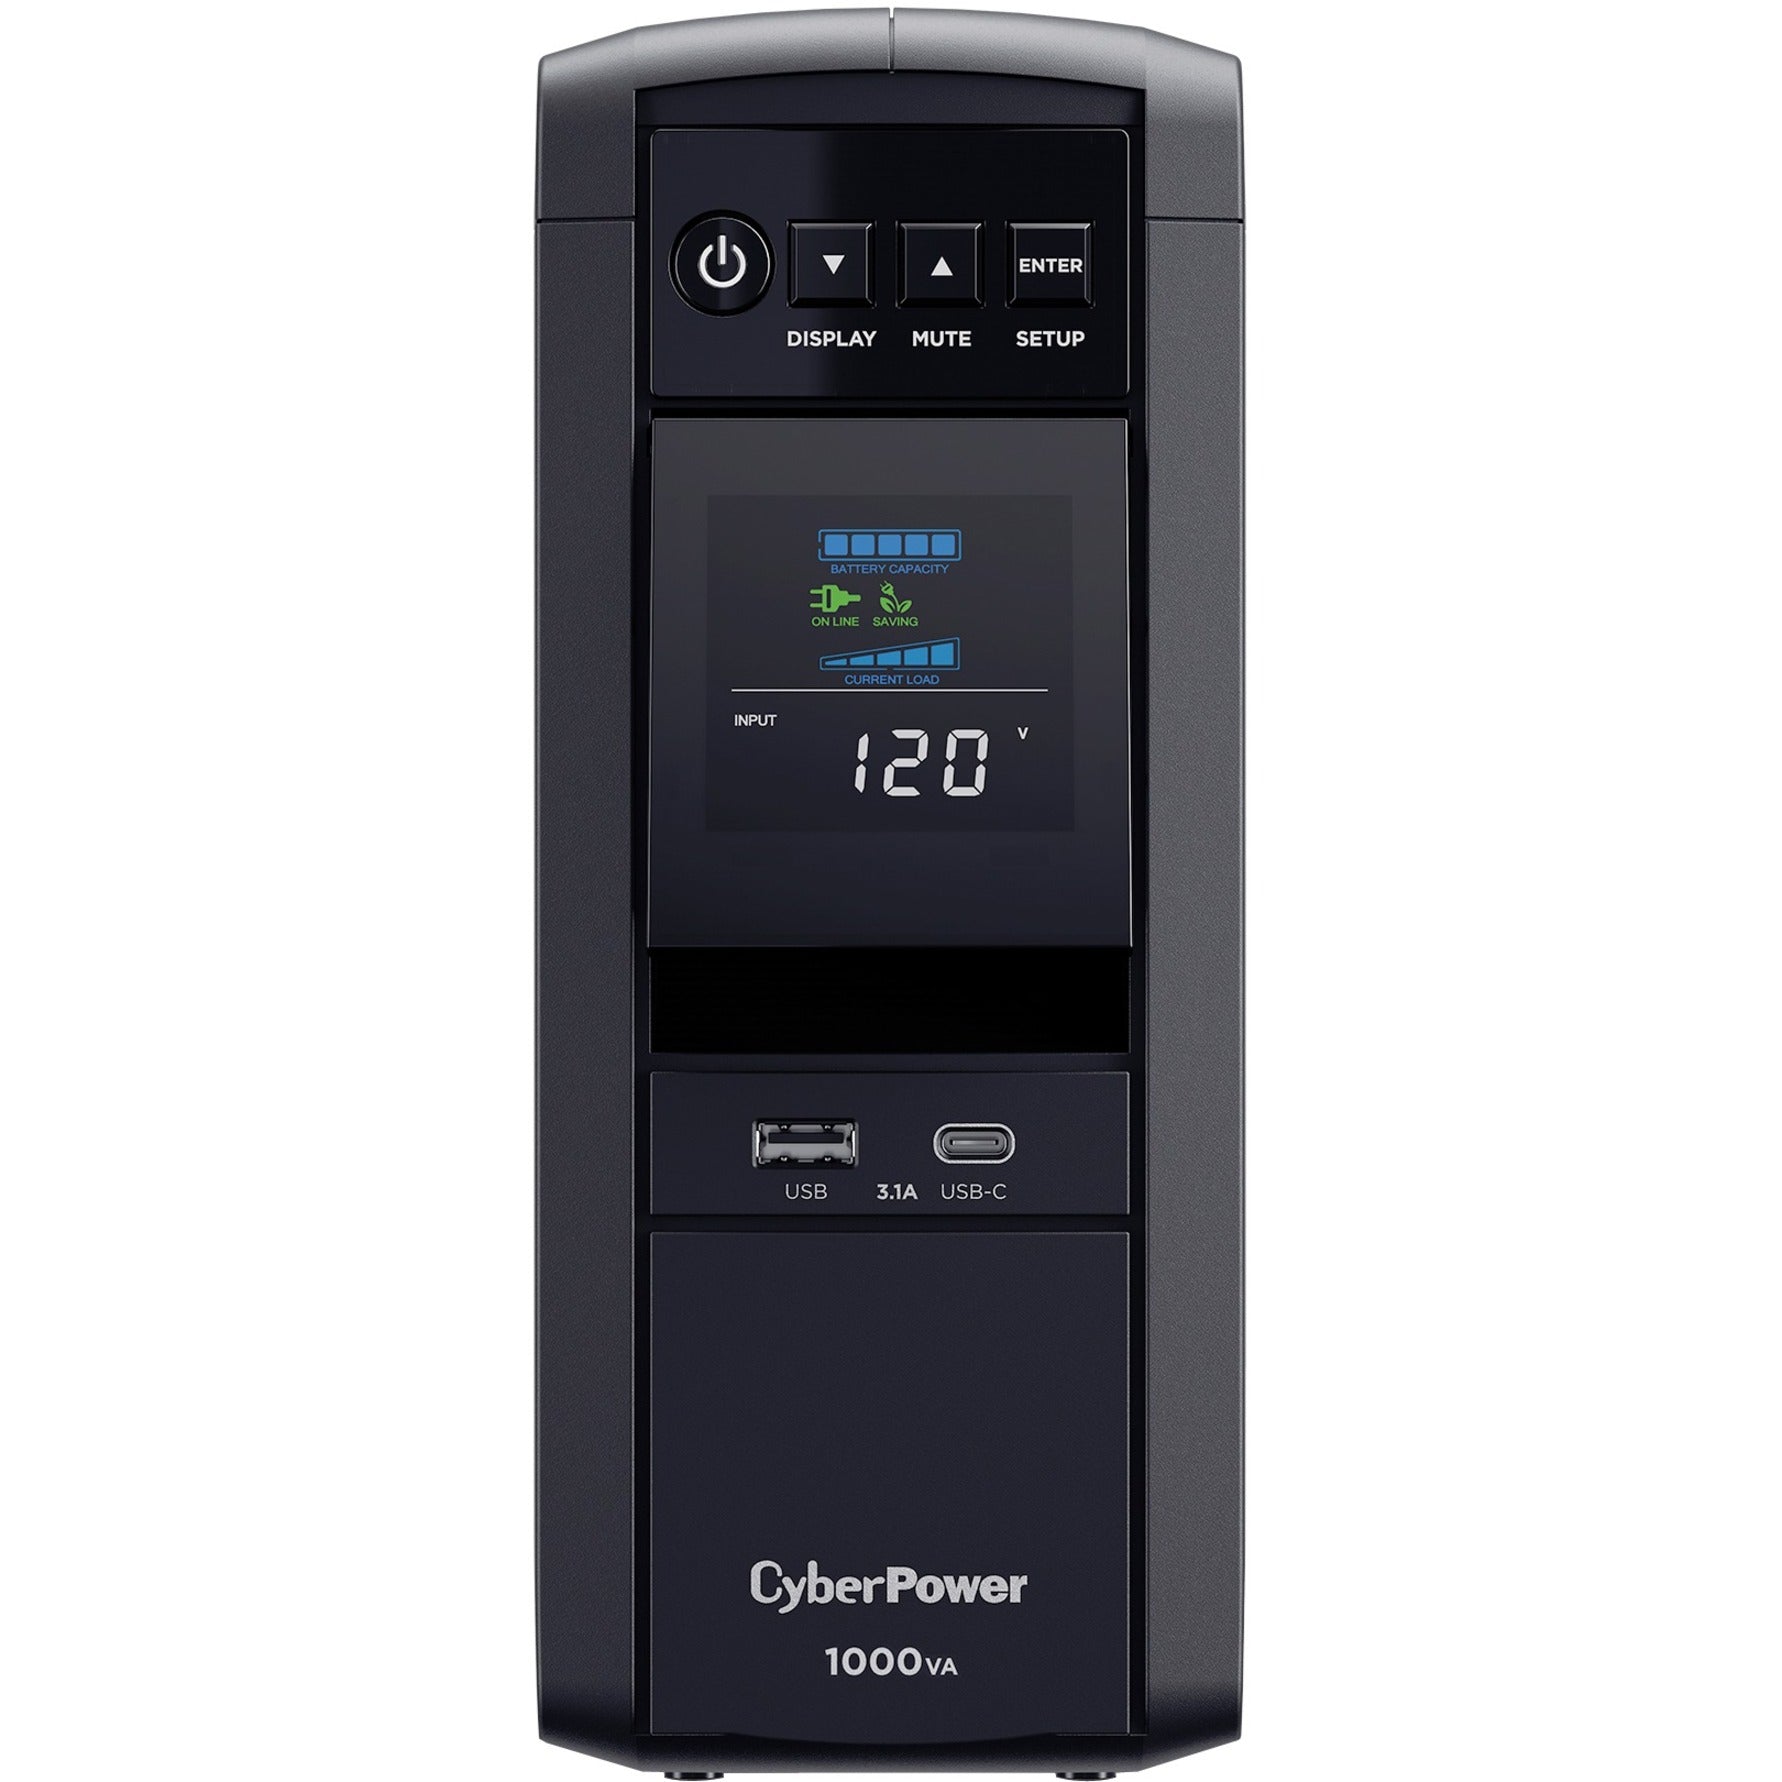 CyberPower CP1000PFCLCD PFC Sinewave UPS Systems, 1000VA Mini-Tower UPS, 3 Year Warranty, Energy Star Certified